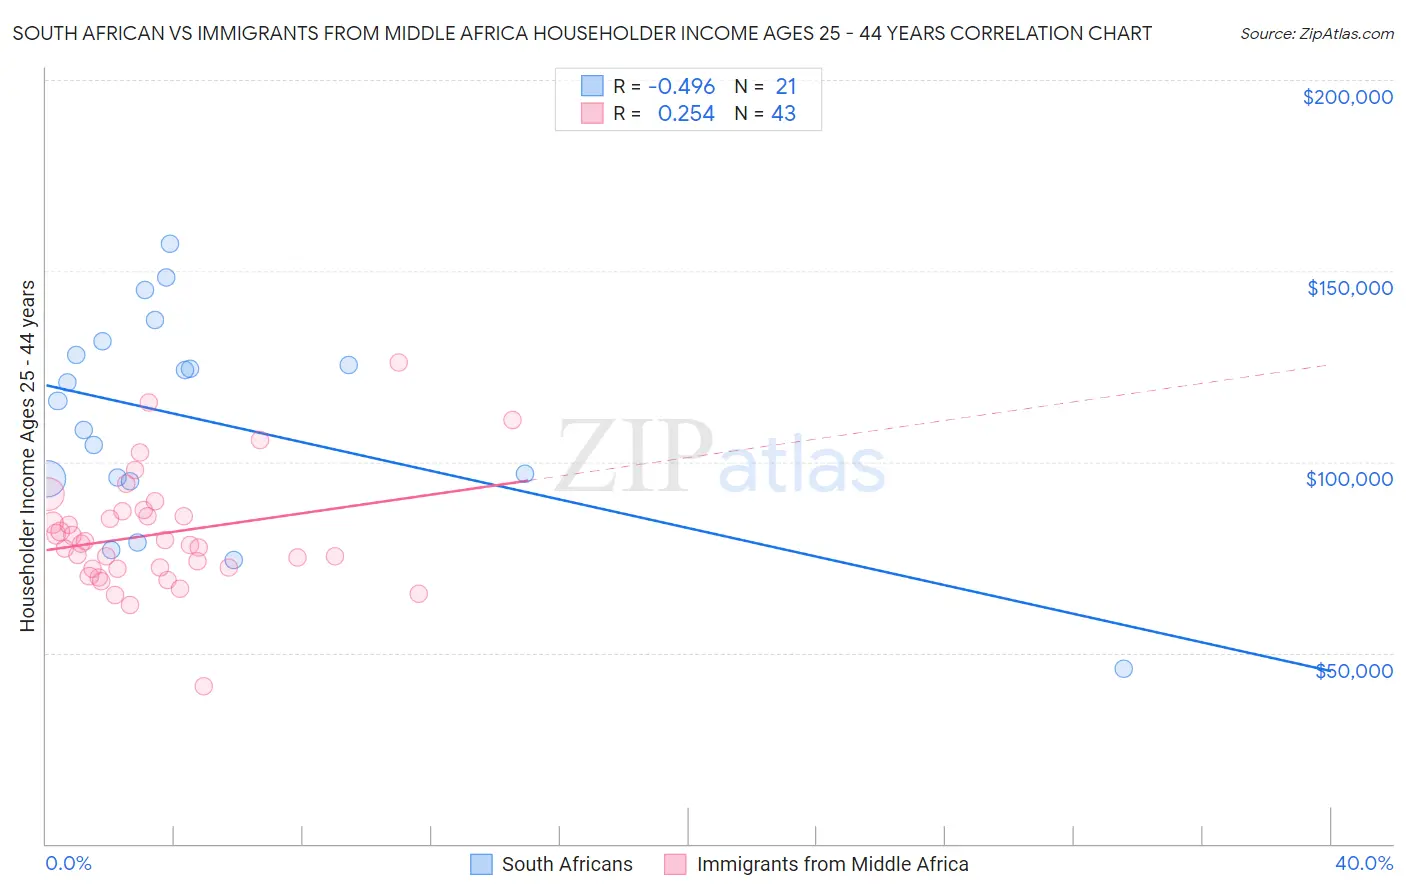 South African vs Immigrants from Middle Africa Householder Income Ages 25 - 44 years